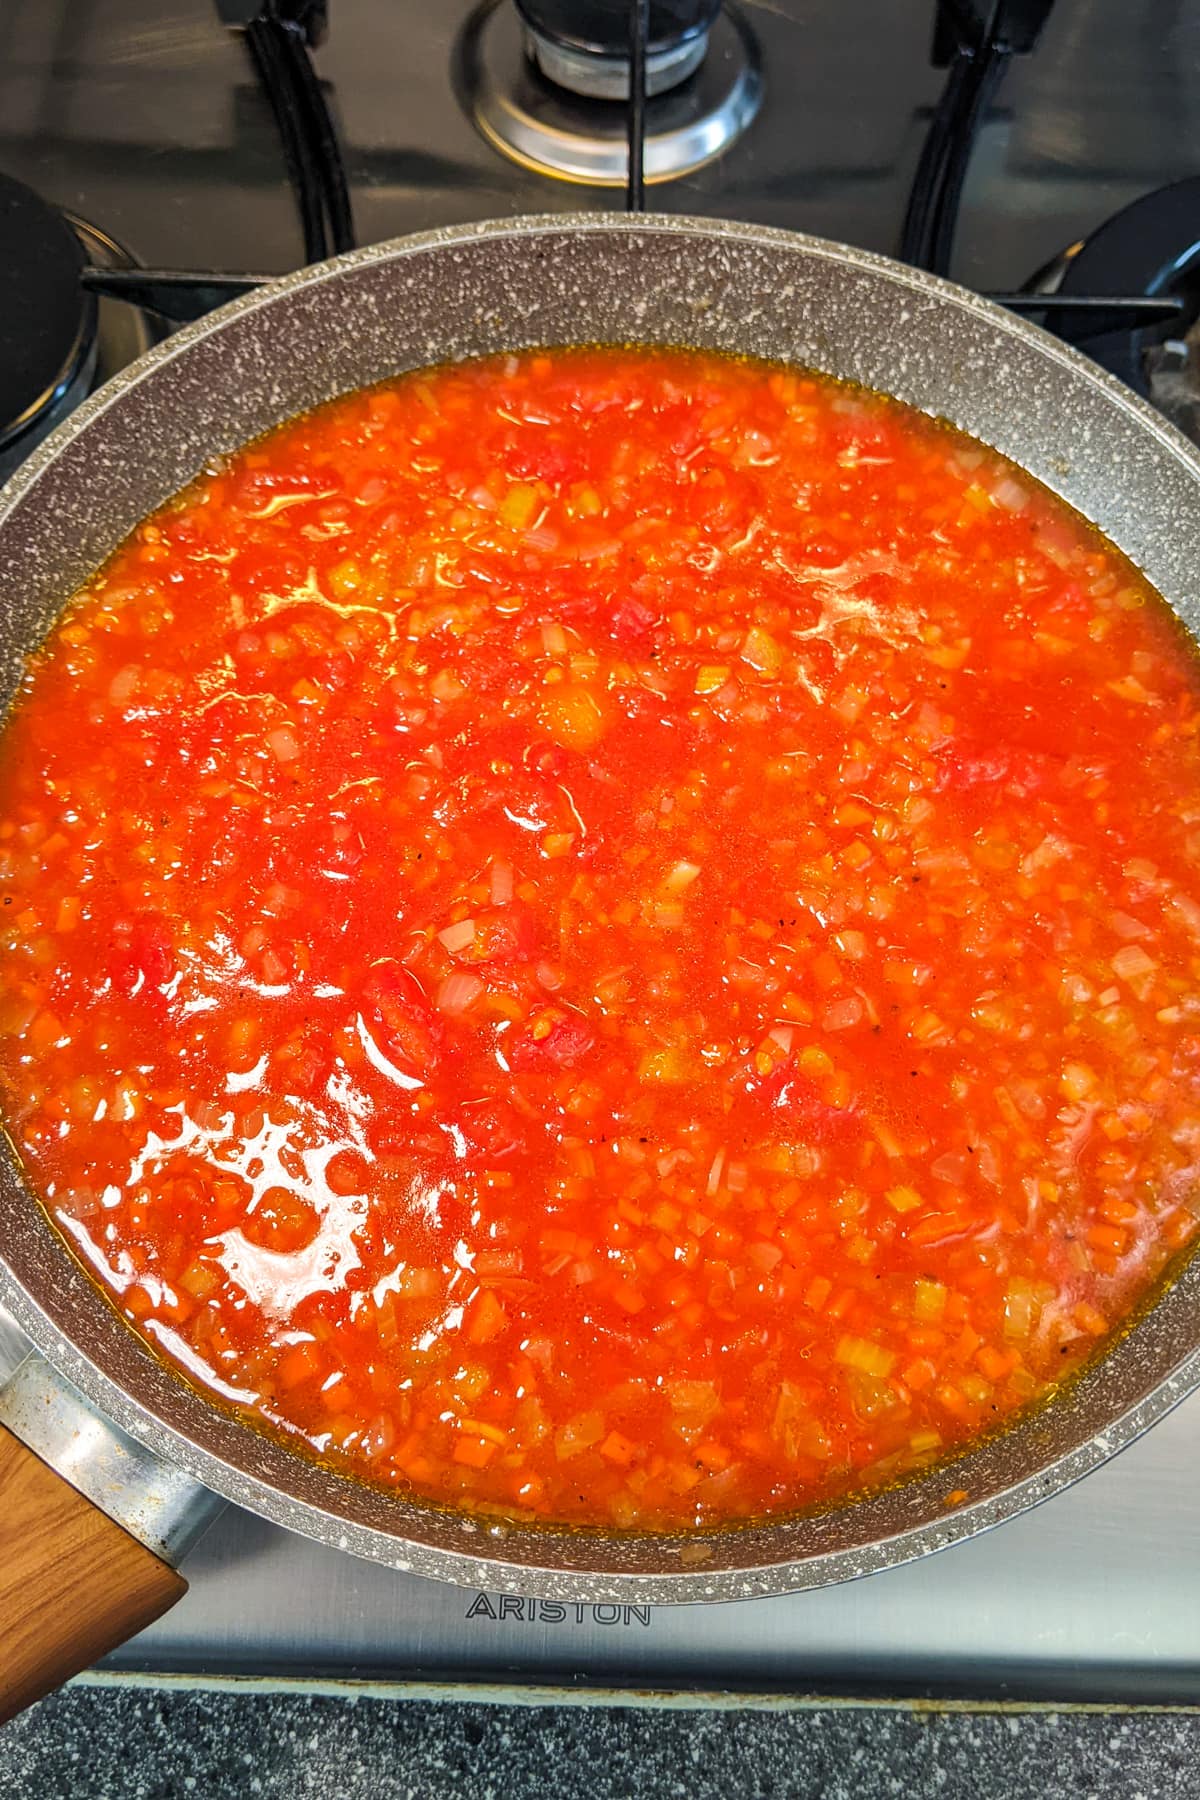 Frying tomato sauce with fried vegetables on the stove.